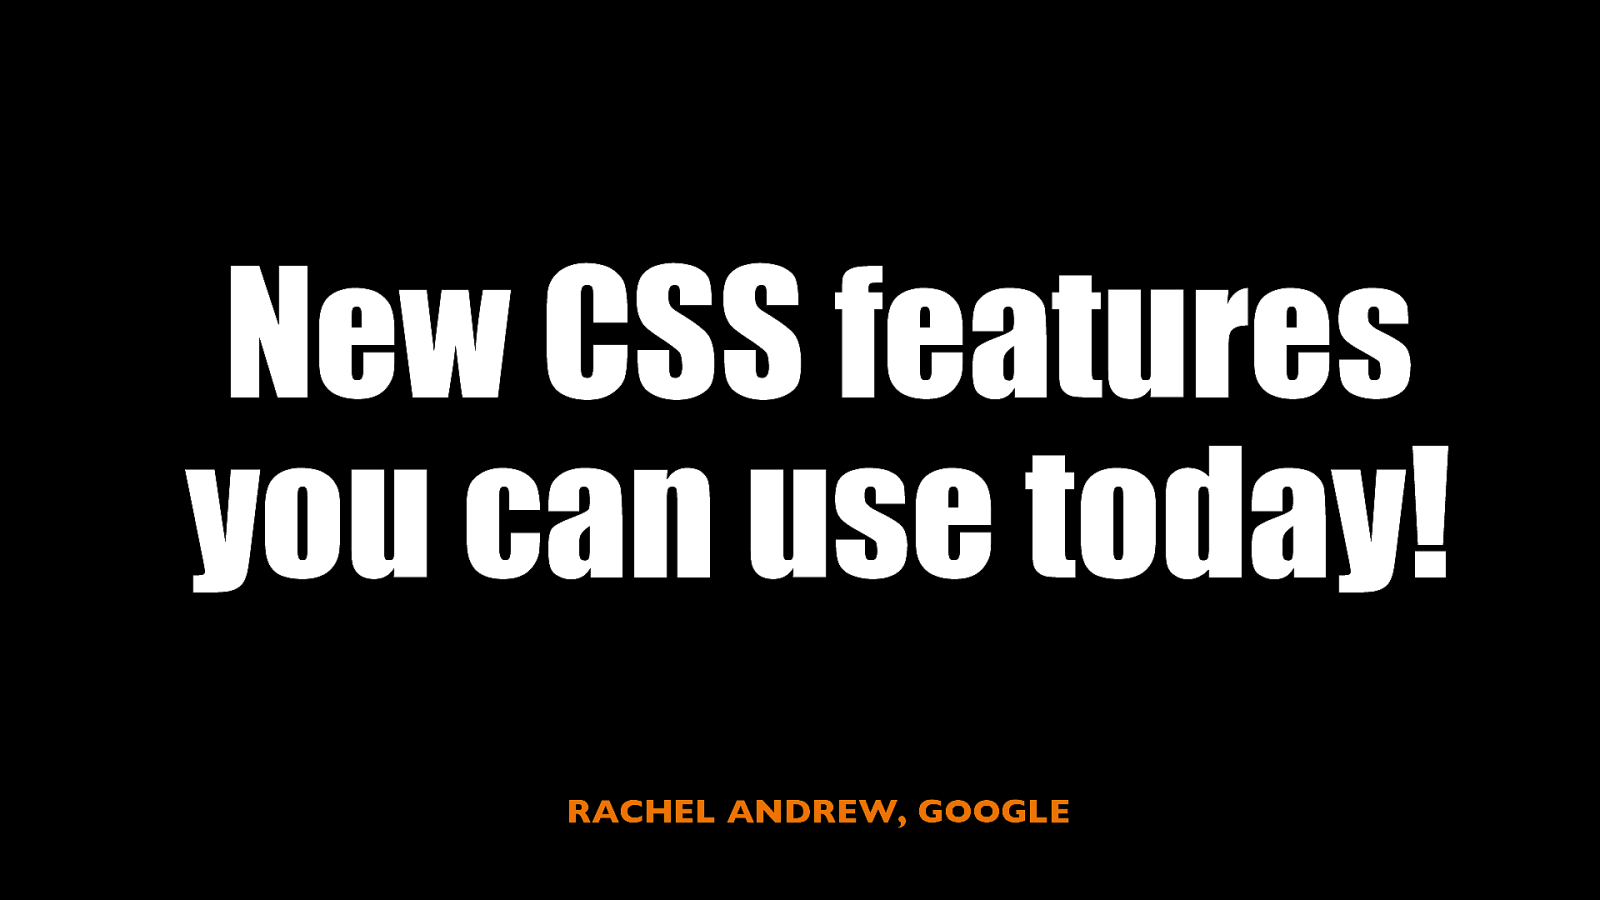 New CSS features you can use today